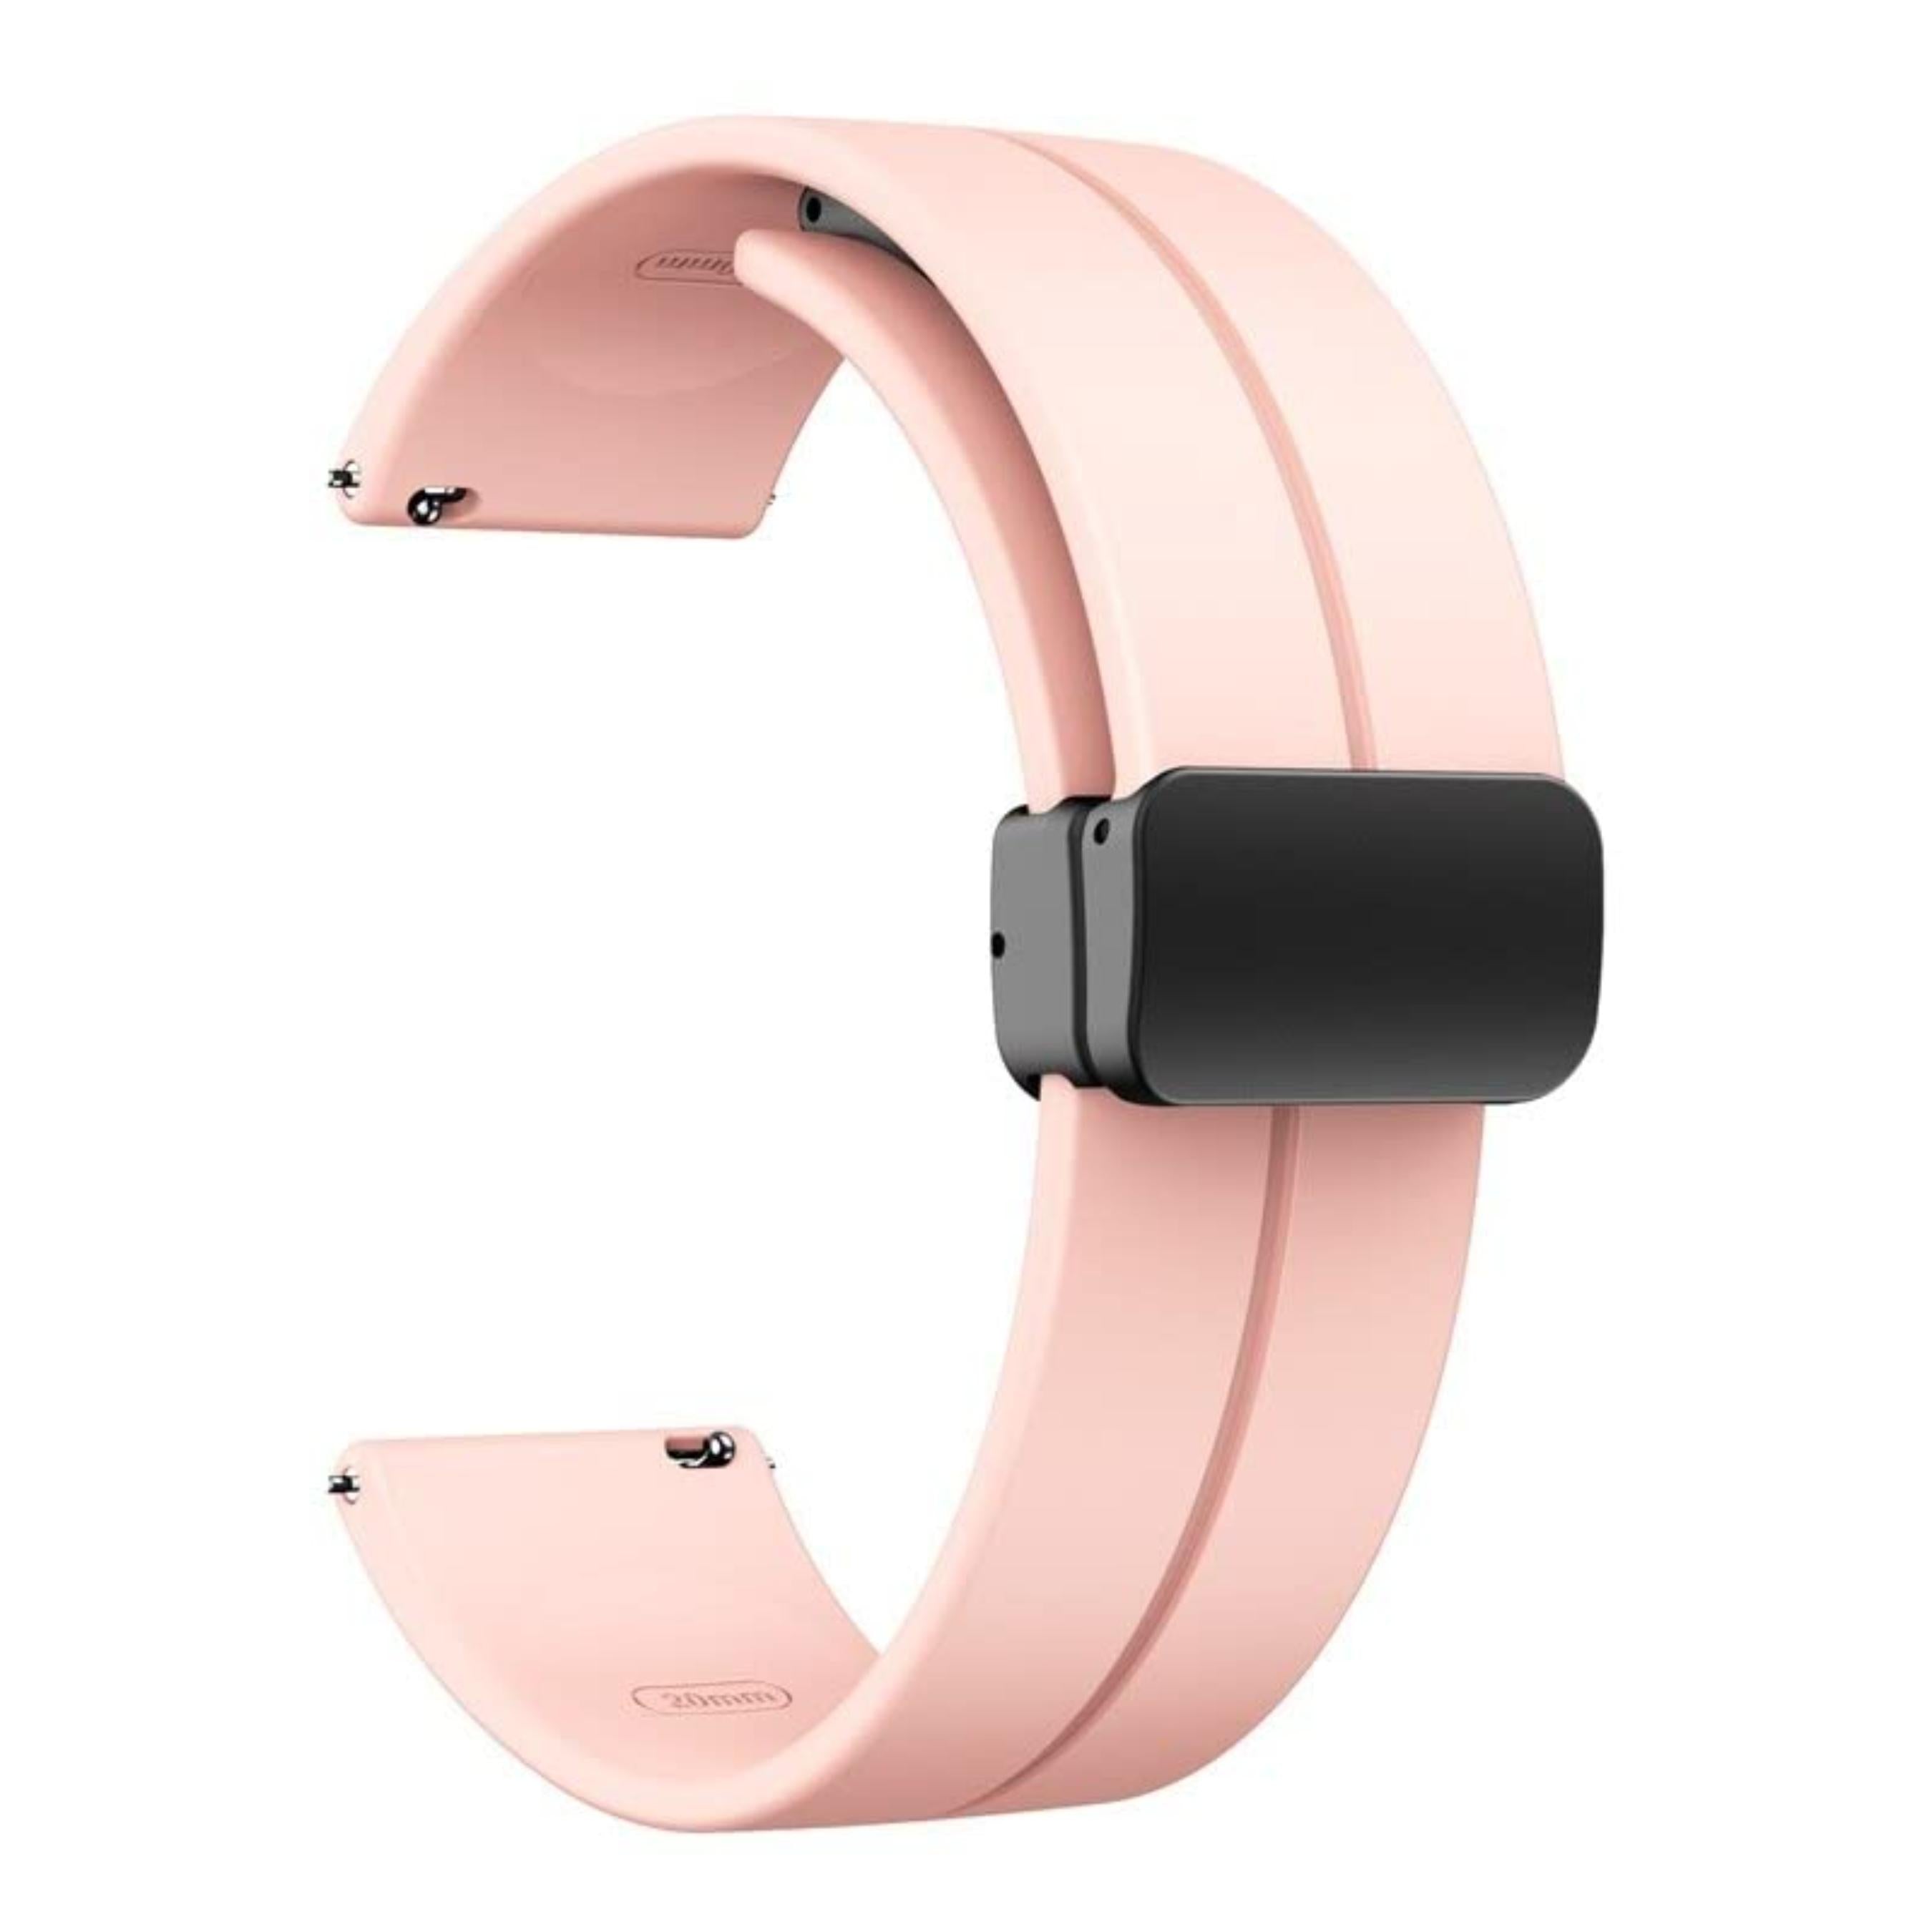 Lorenz Silicone 22mm Replacement Watch Strap with Adjustable Magnetic Lock Feature Compatible with Boat Xtend, Boat Xtend Pro, Noise & all other 22MM Watches (Pink)